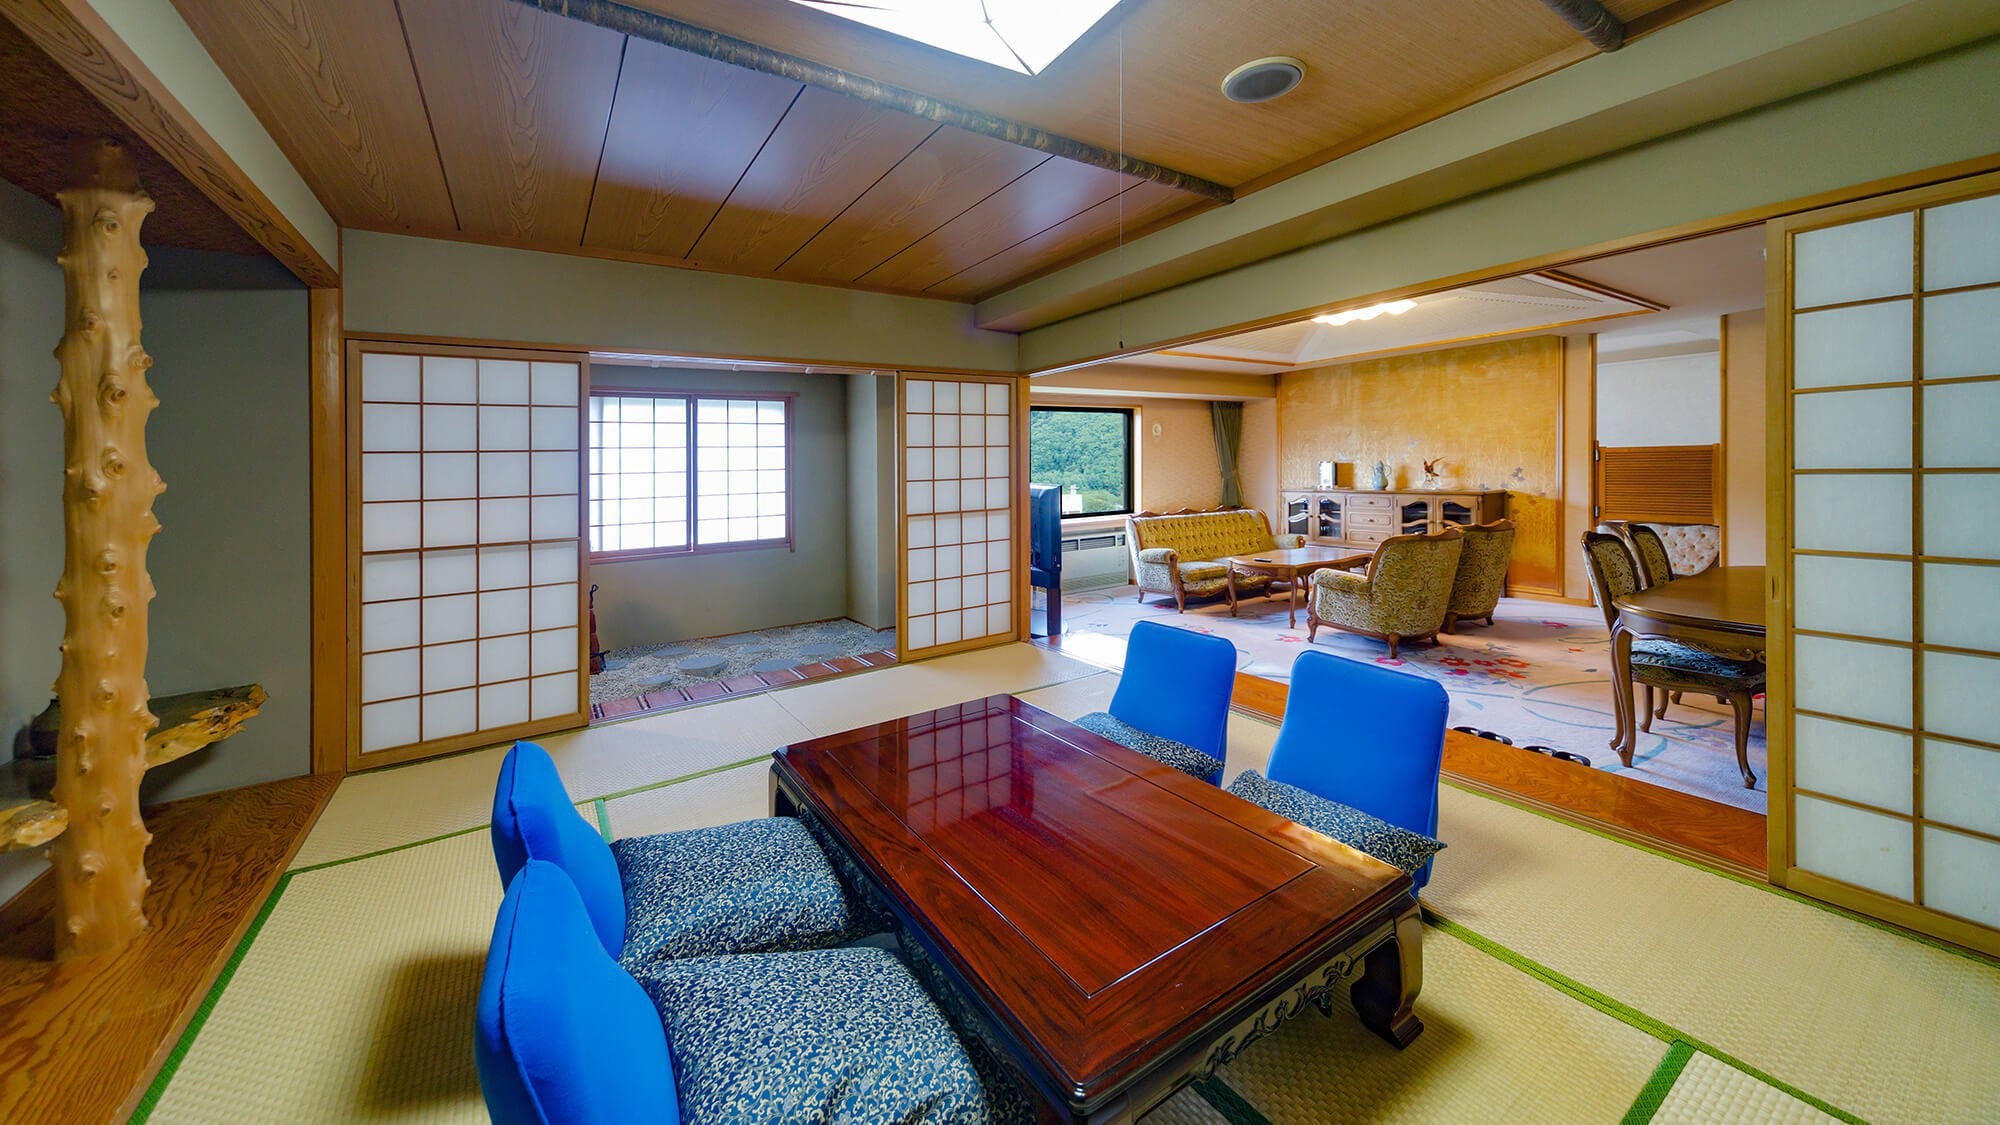 [Main Building] Special Room A on the top floor / Japanese and Western rooms of the highest grade in the main building with a living room and kitchen.